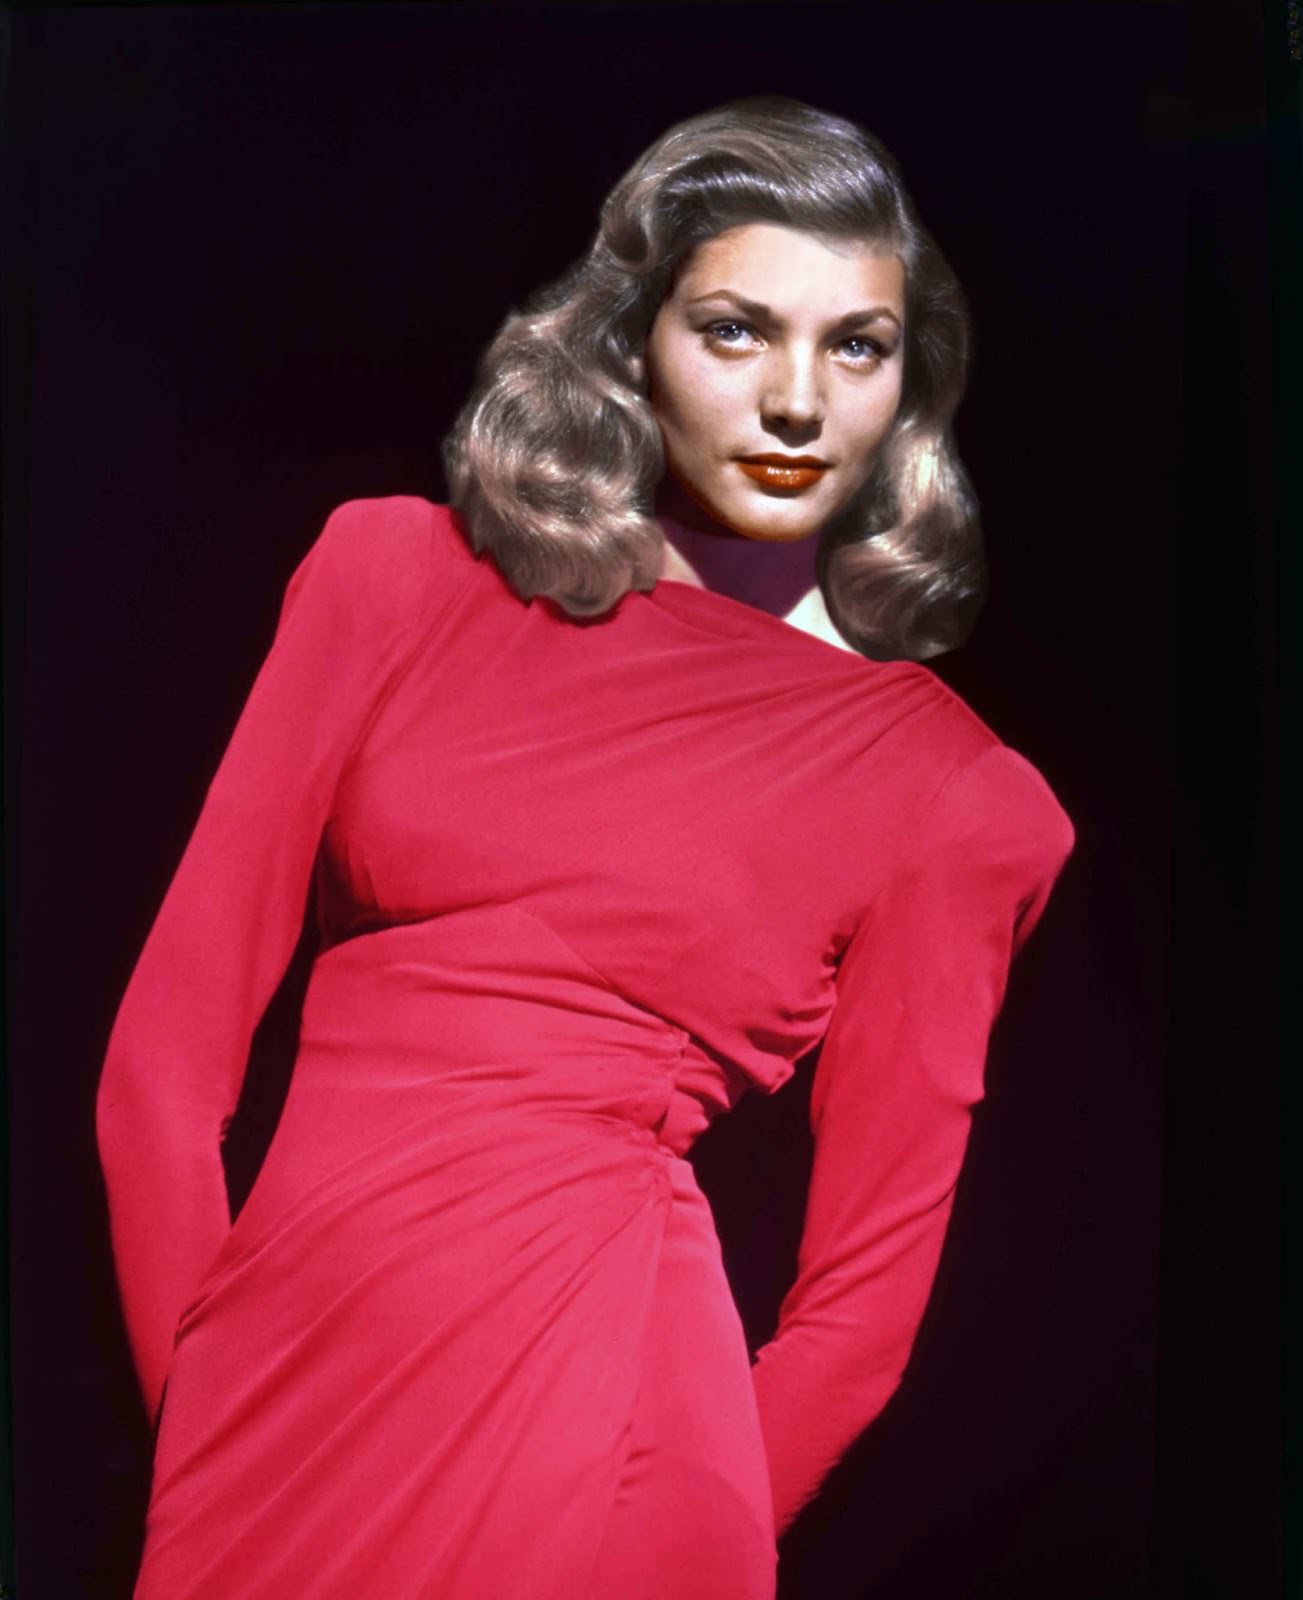 Strong shoulders and bold color in an undated publicity still.